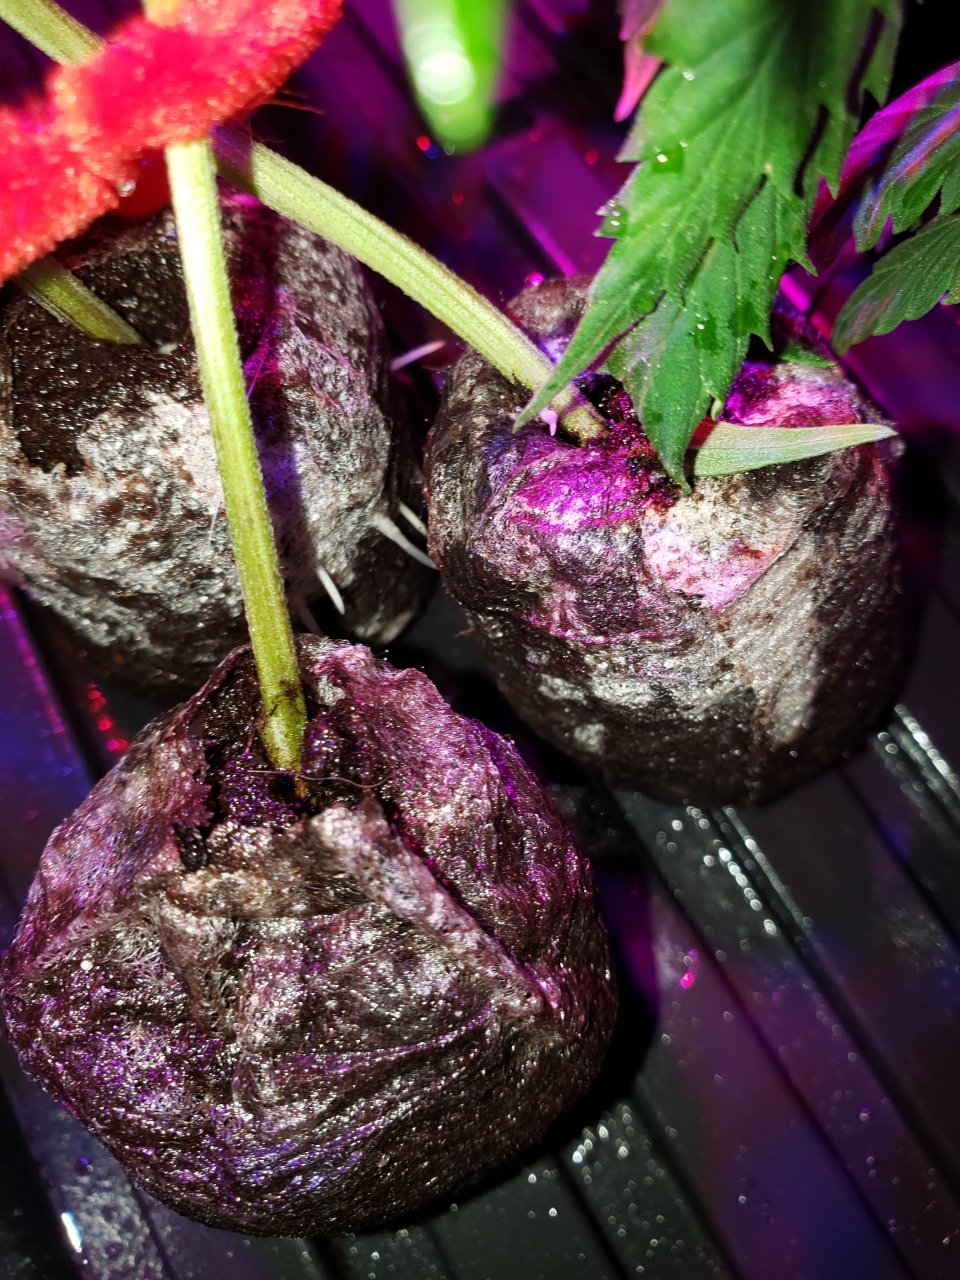 New clones made roots in 5 days white Alien's and Ice Cream